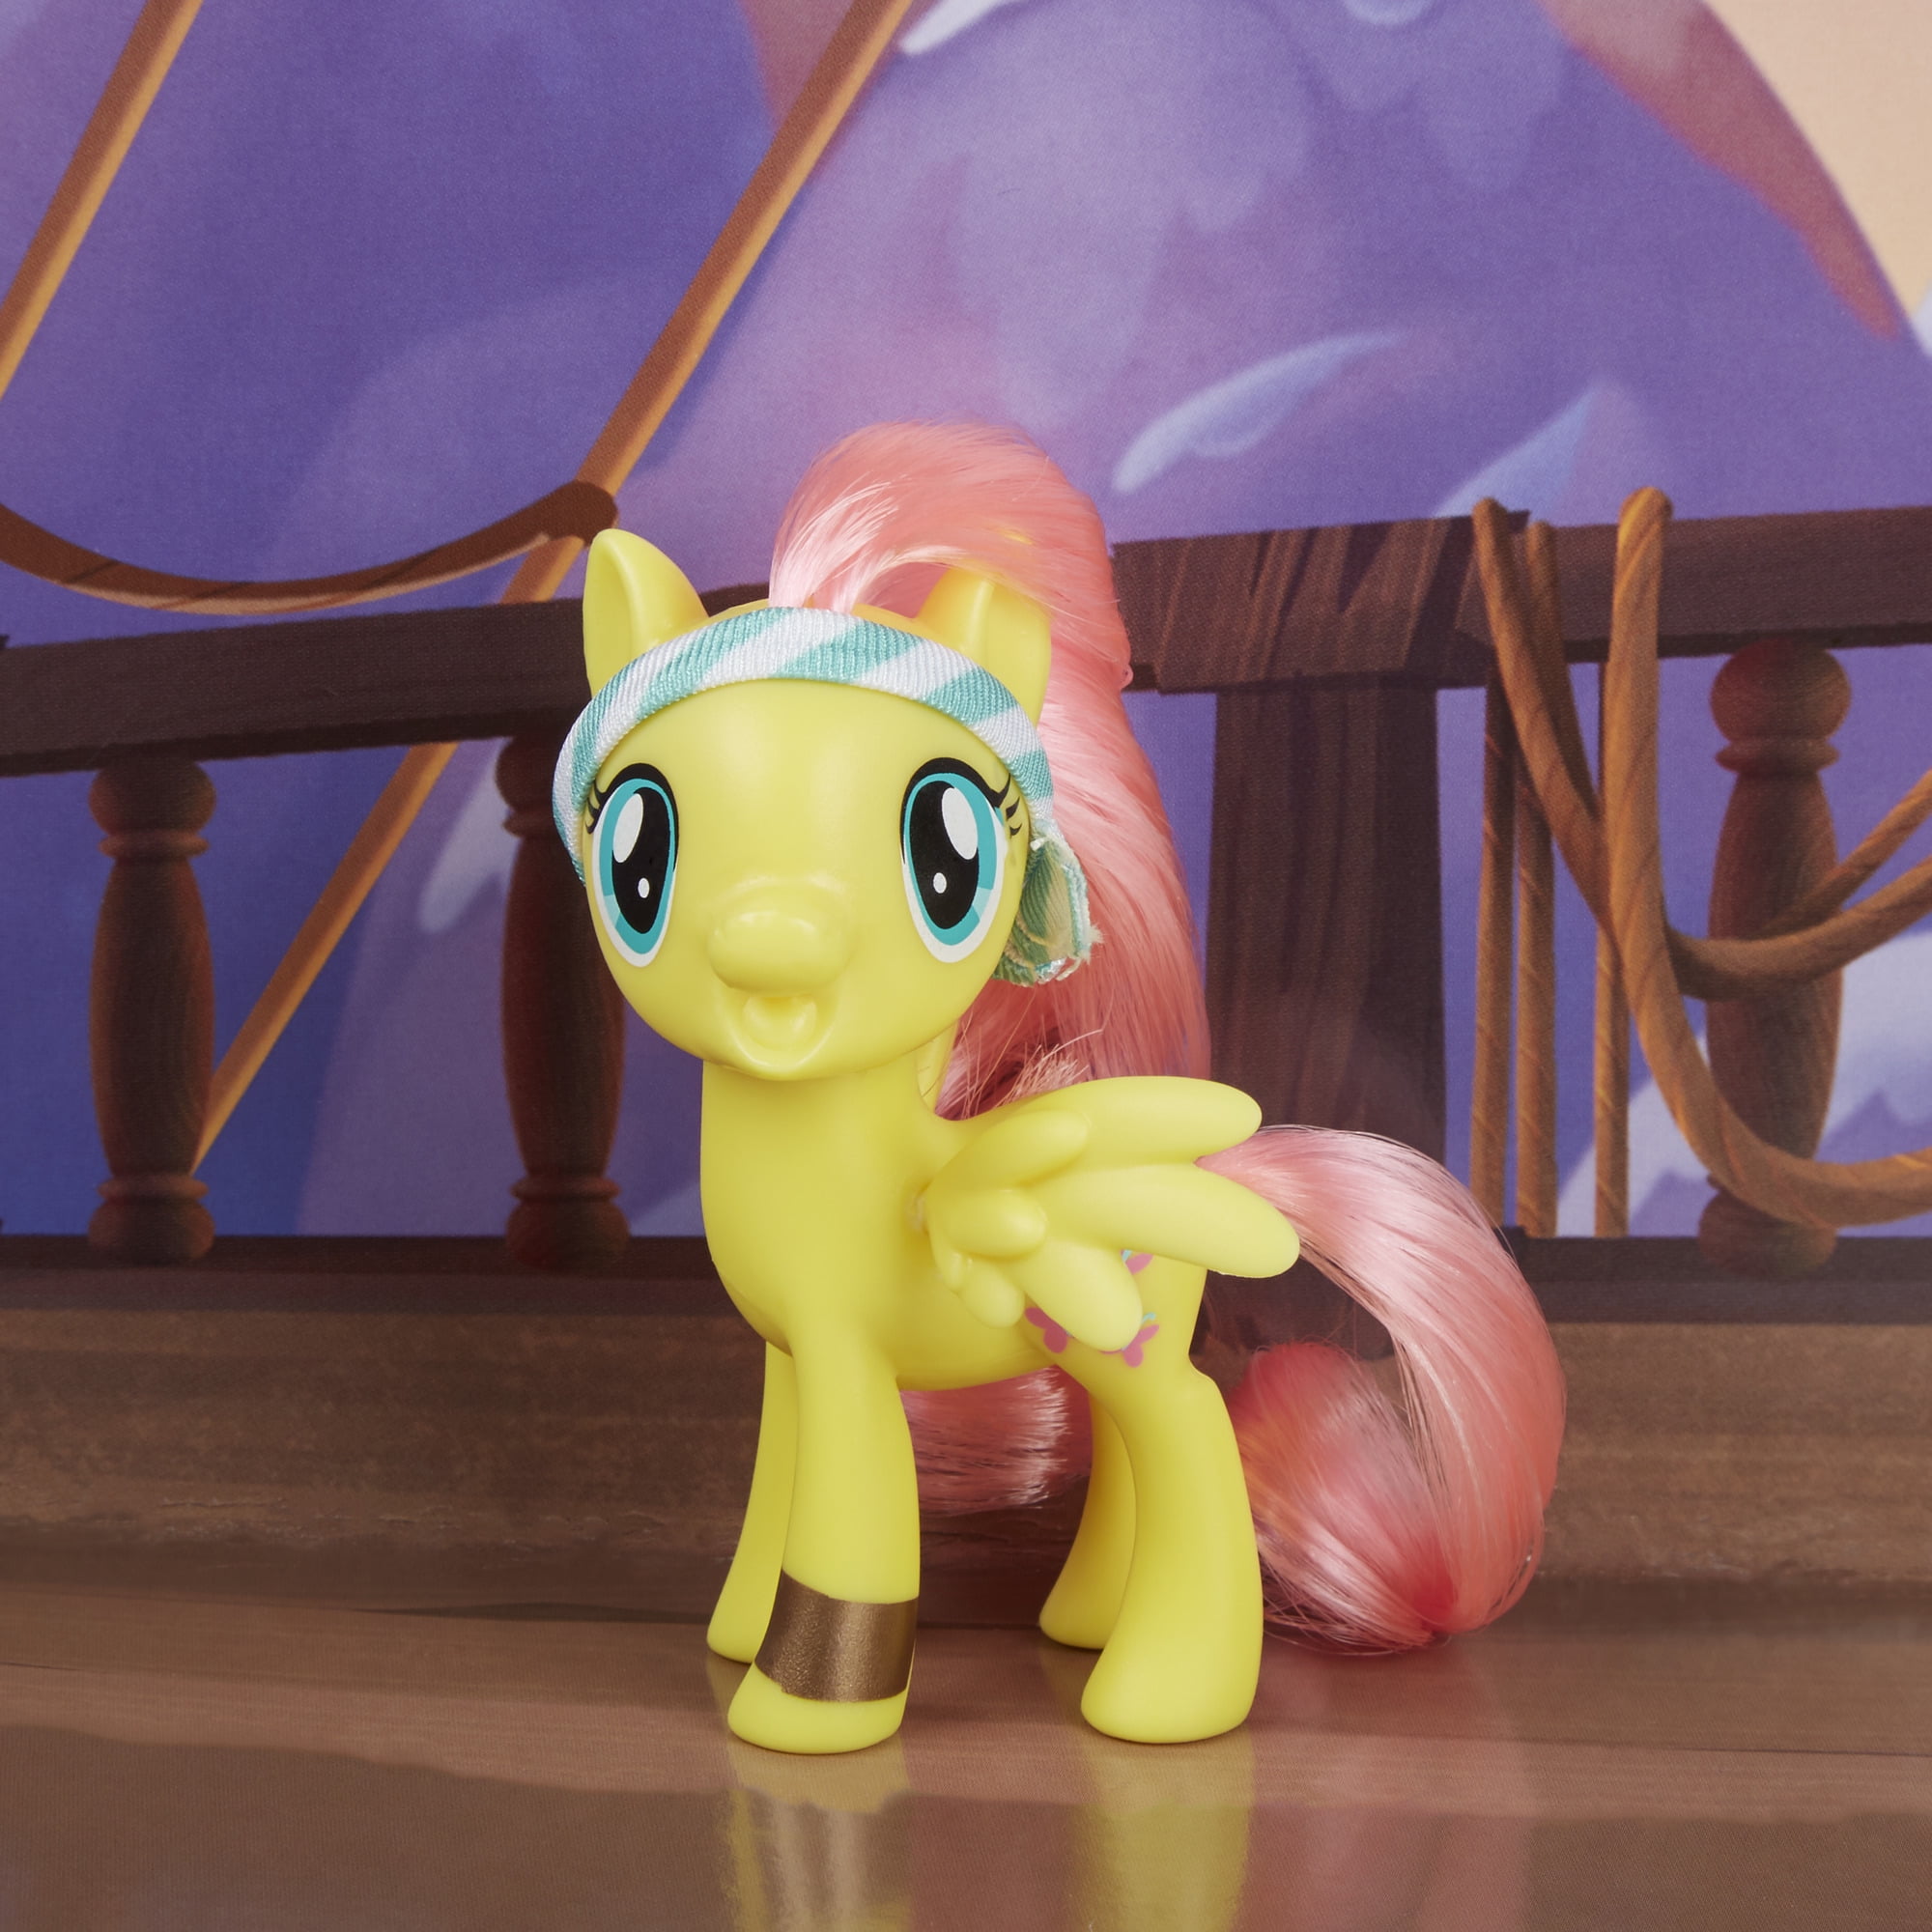 Details about   MY LITTLE PONY FRIENDSHIP IS MAGIC PIRATE PONIES COLLECTION 6 PONIES NEW! 